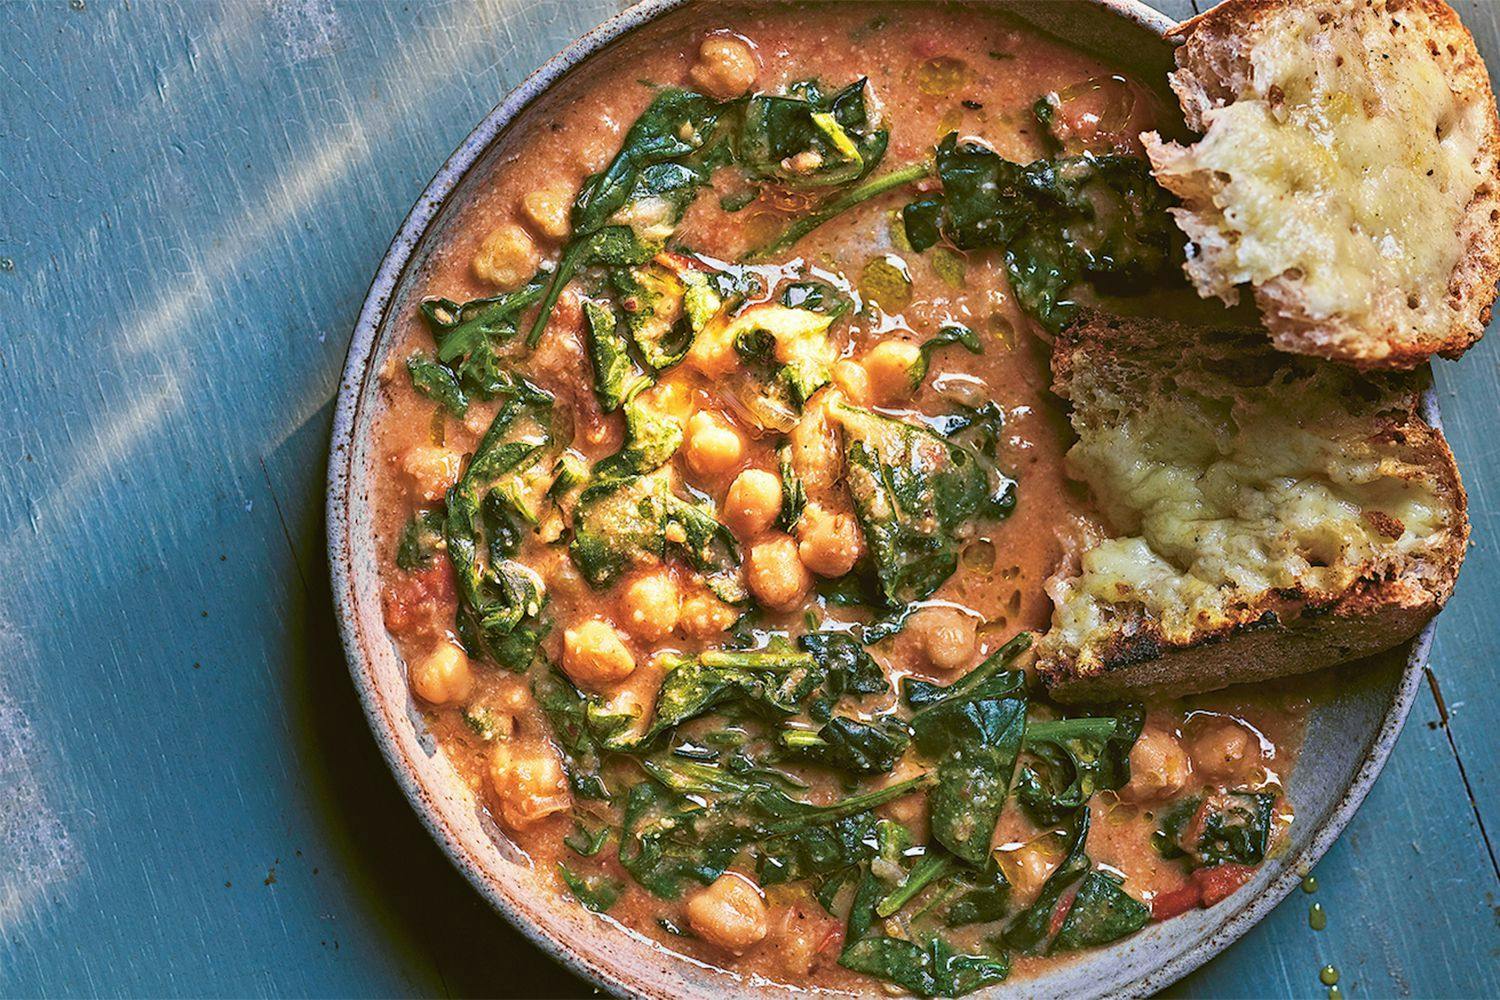 Stew made with chickpeas and spinach